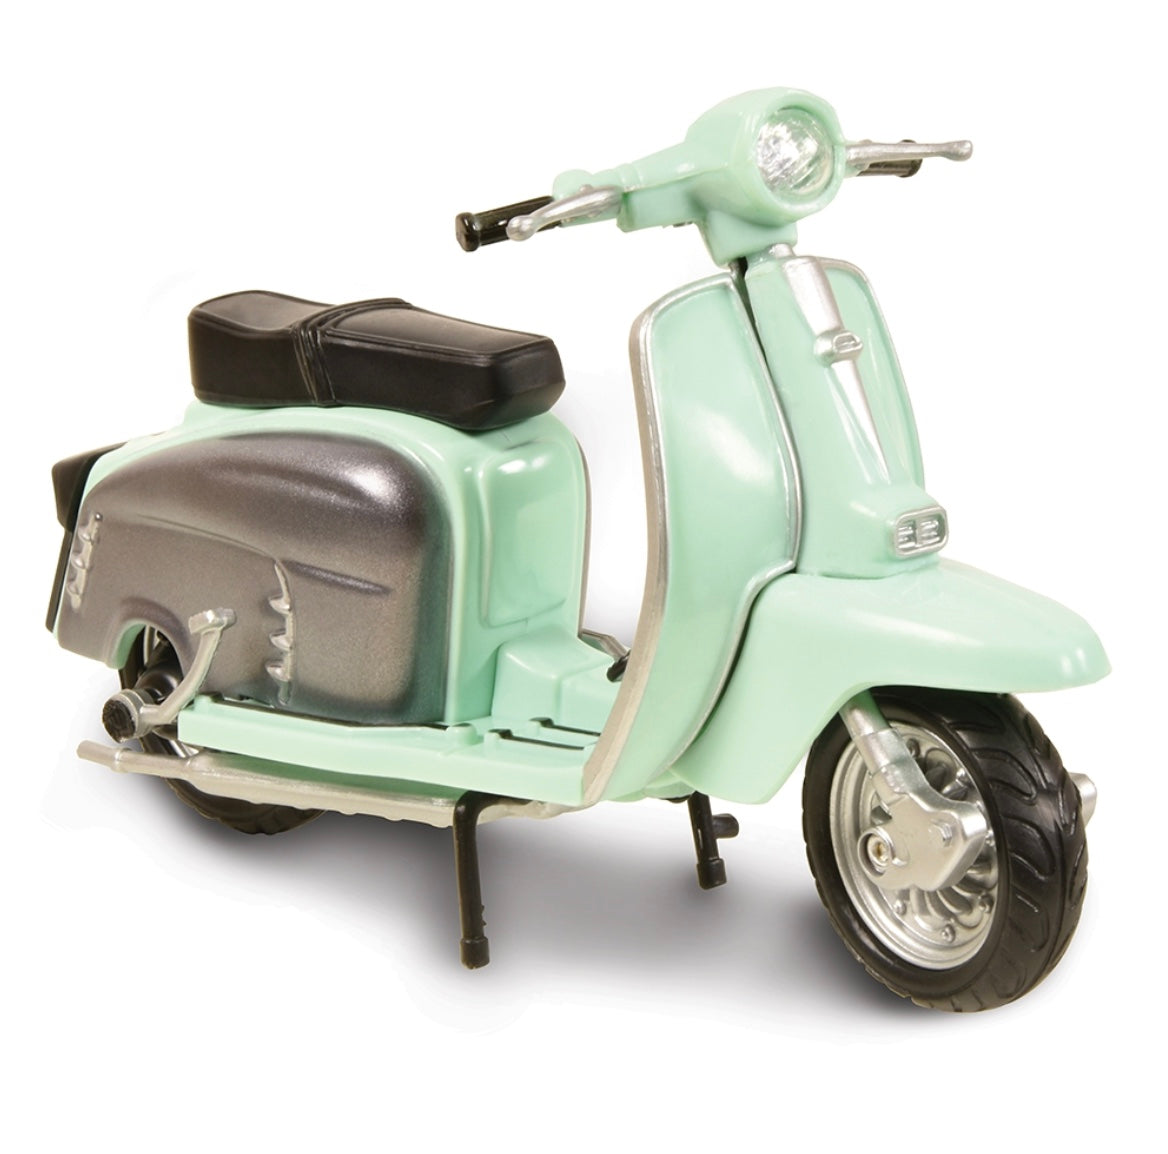 Sixties Scooter Assortment - Chester Model Centre